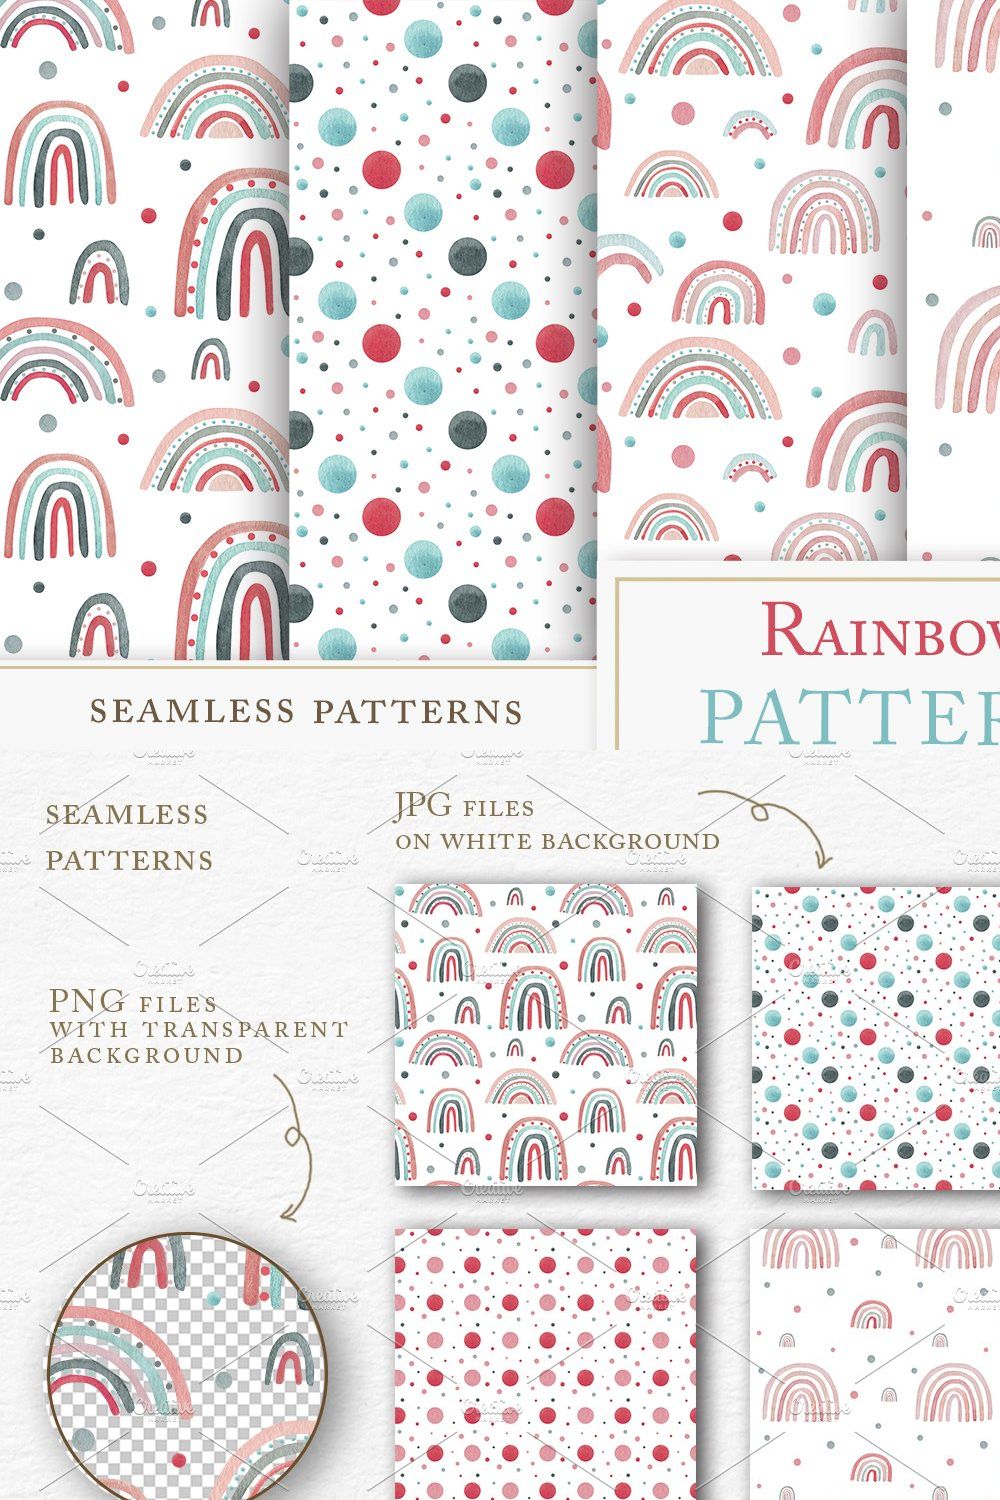 Watercolor RAINBOW patterns pinterest preview image.